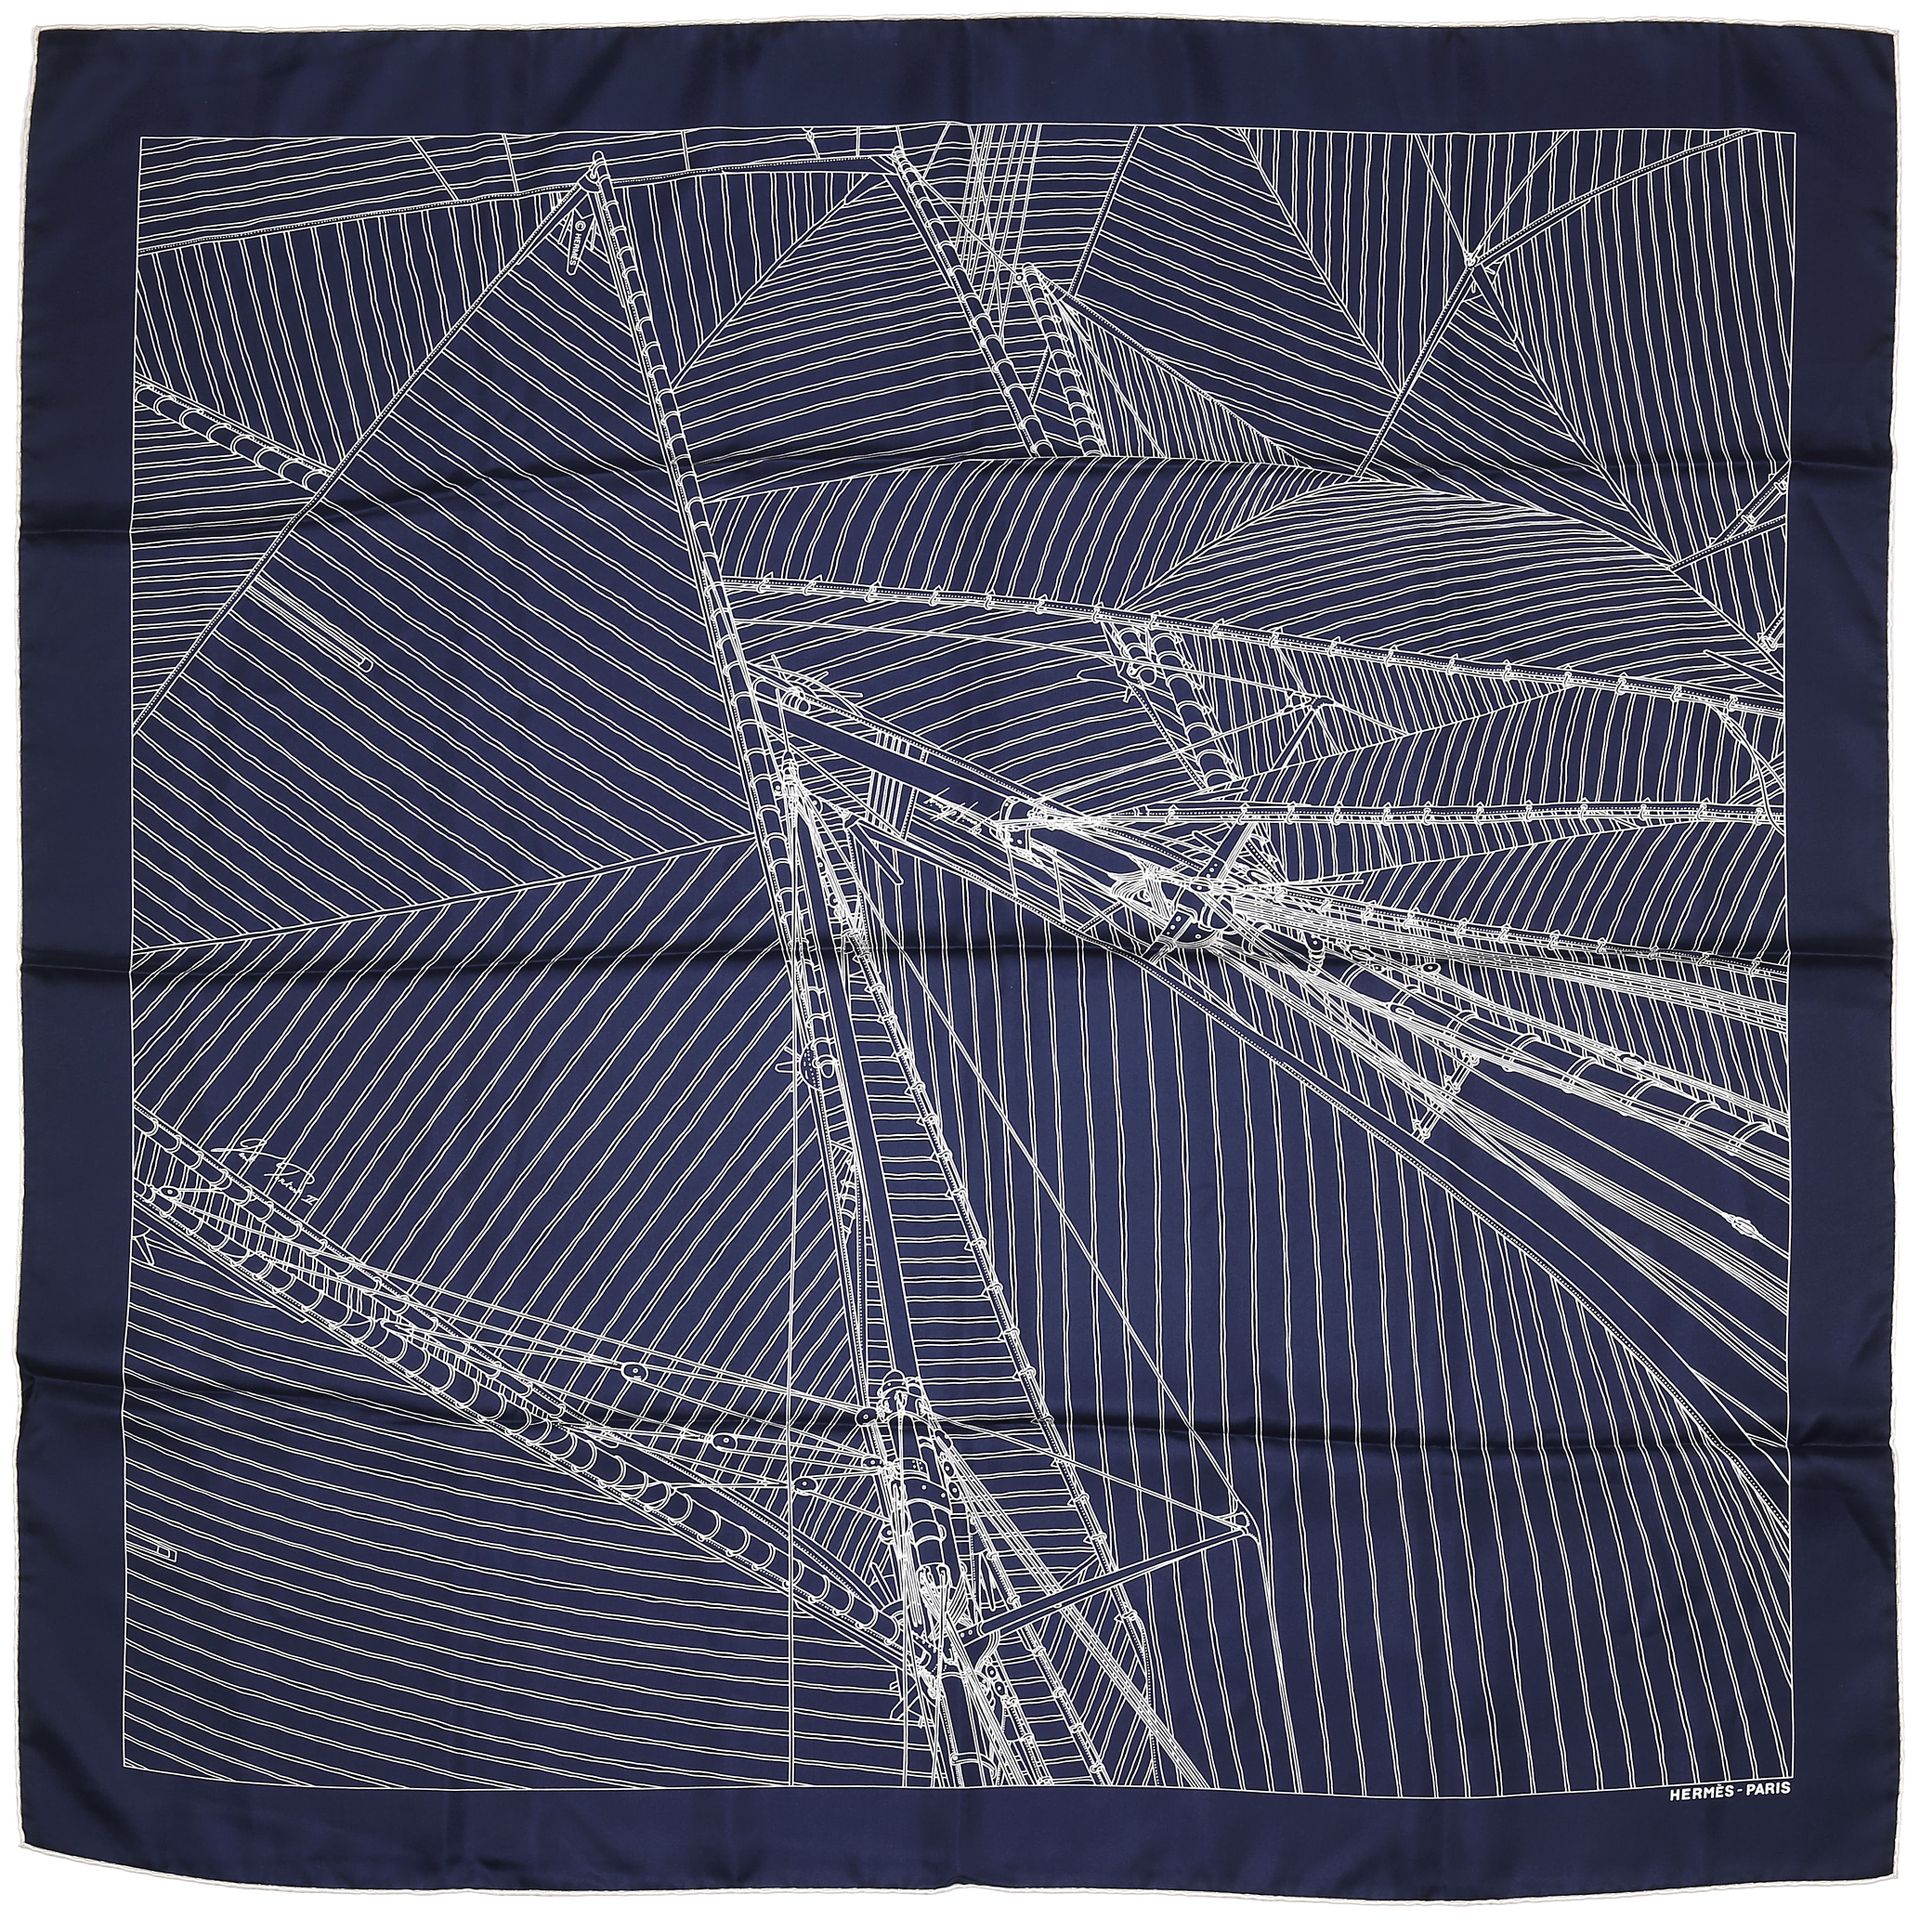 Null HERMÈS,
Silk scarf "Vent Portant II" with navy blue background and white ve&hellip;